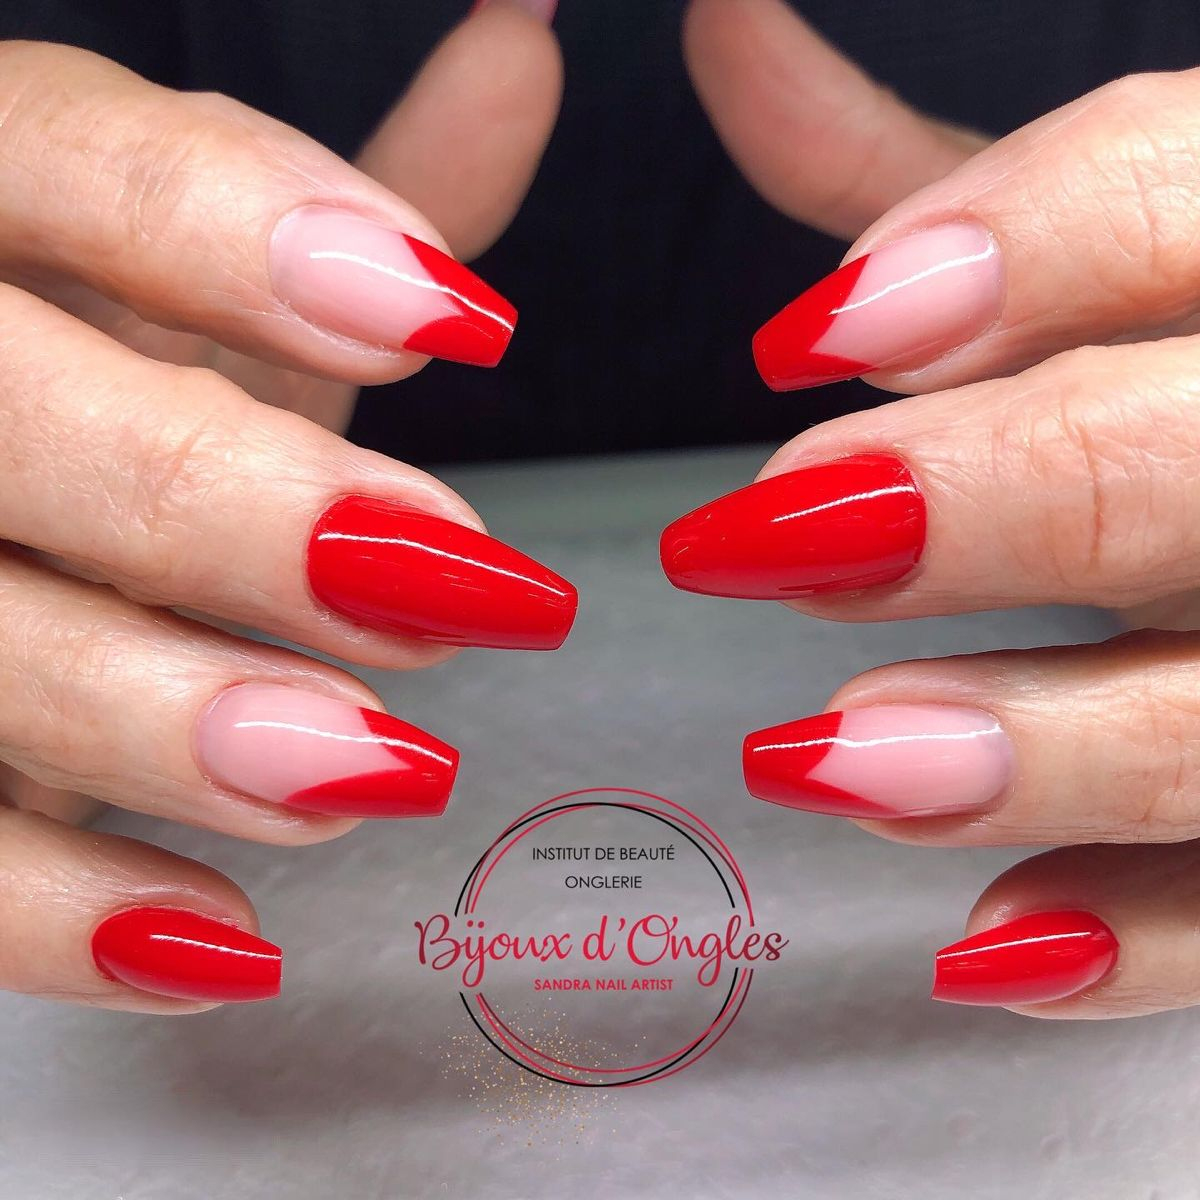 Nails Rouge | Ongles Stylés, Ongles, Ongle Gel Rouge pour Idee Ongle Rouge Deco